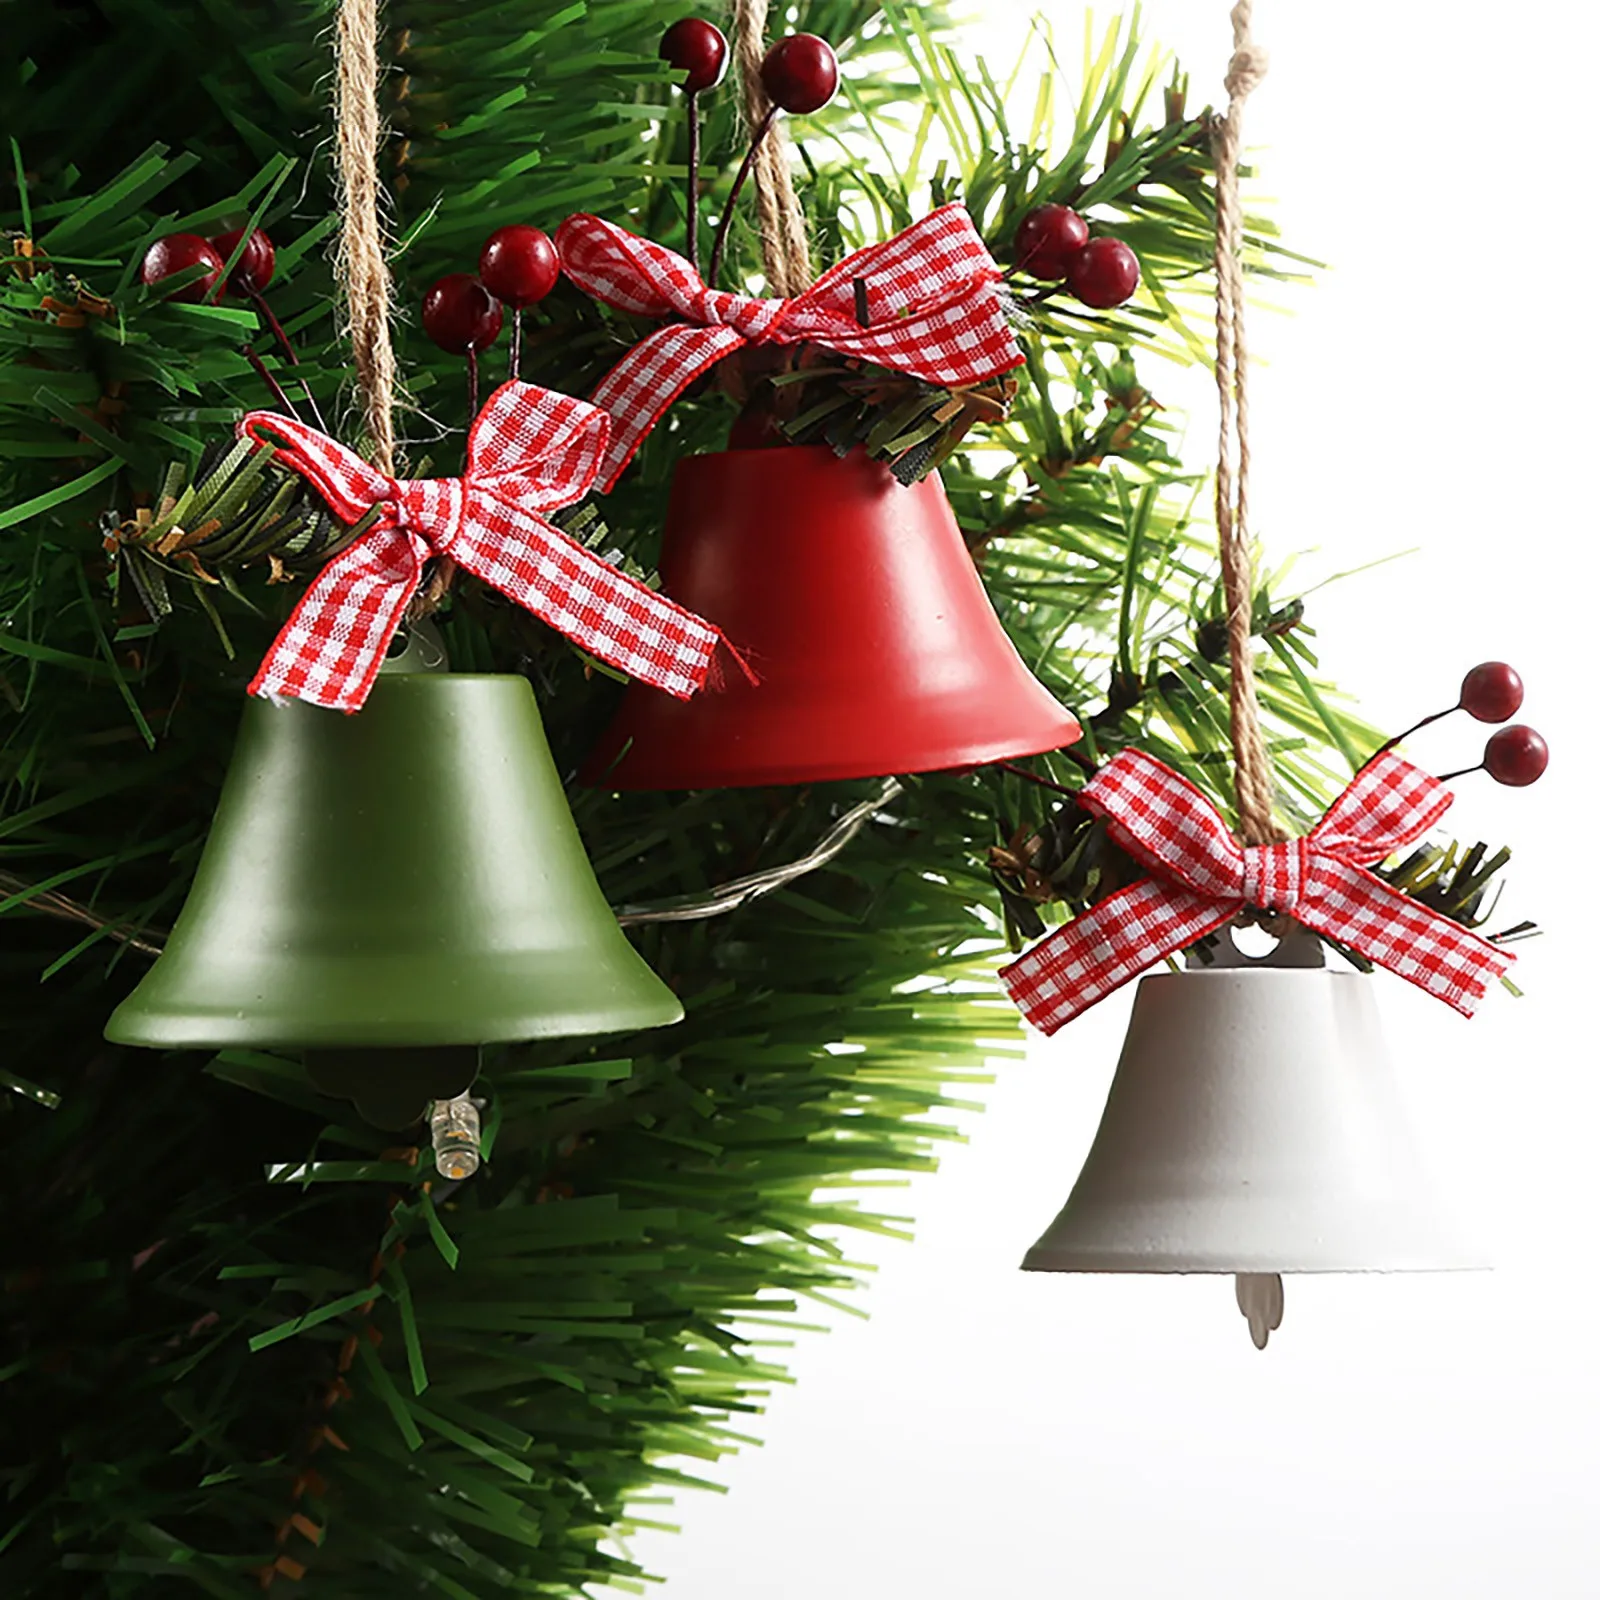 Aipaide 4 PCS Christmas Bell Hanging Decoration Christmas Bell Pendant with Bow-Knot Santa Claus Christmas Tree Elements for Christmas Tree Door Windows Fireplace Decorations